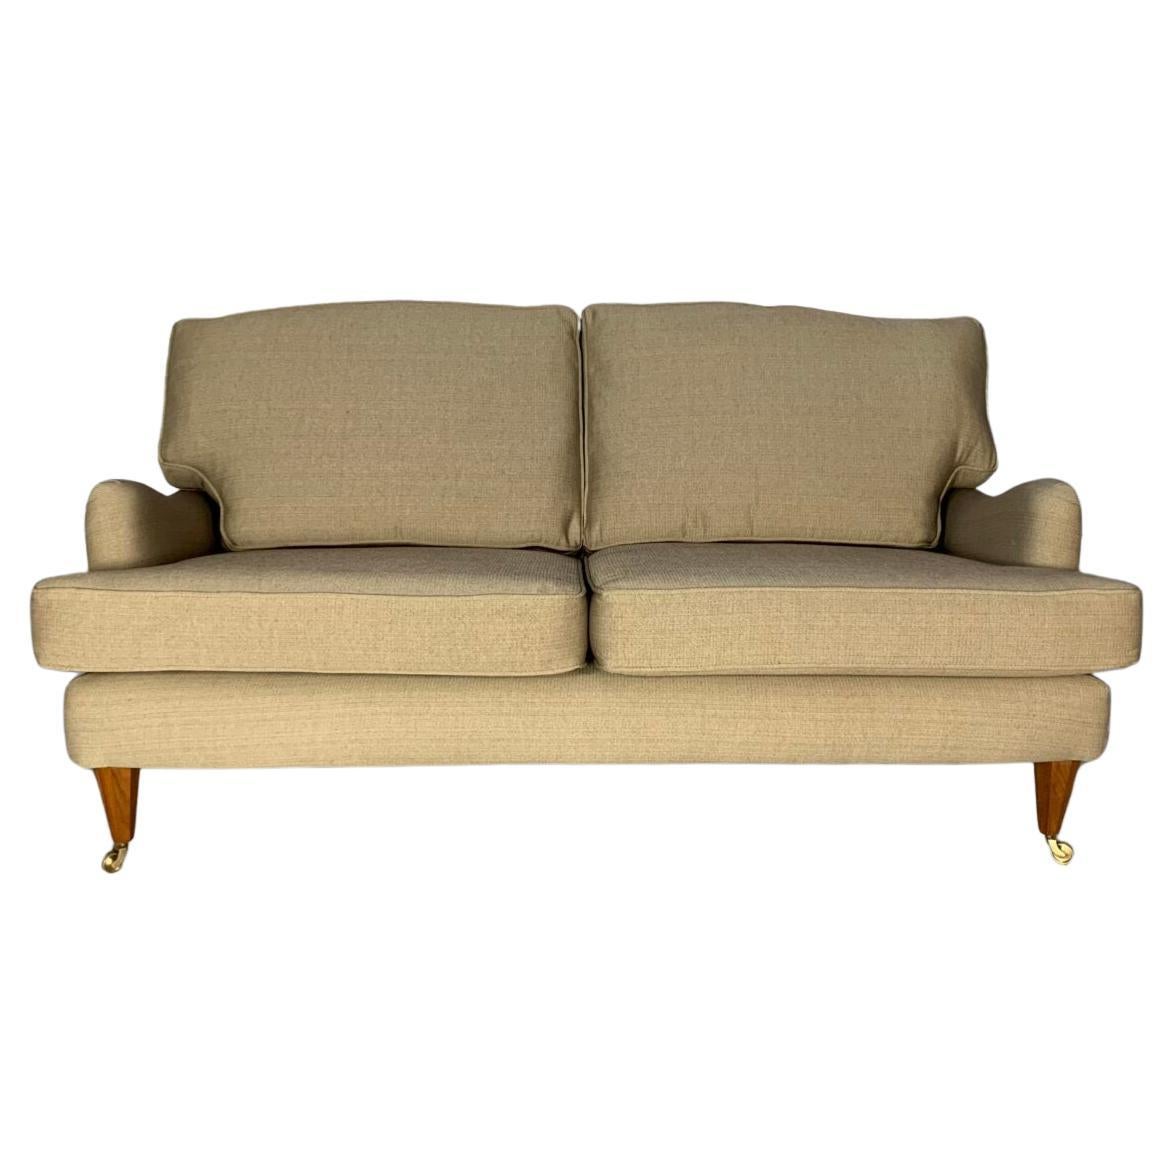 Linley 2.5-Seat Howard-Design Sofa - In Woven Gold Fabric